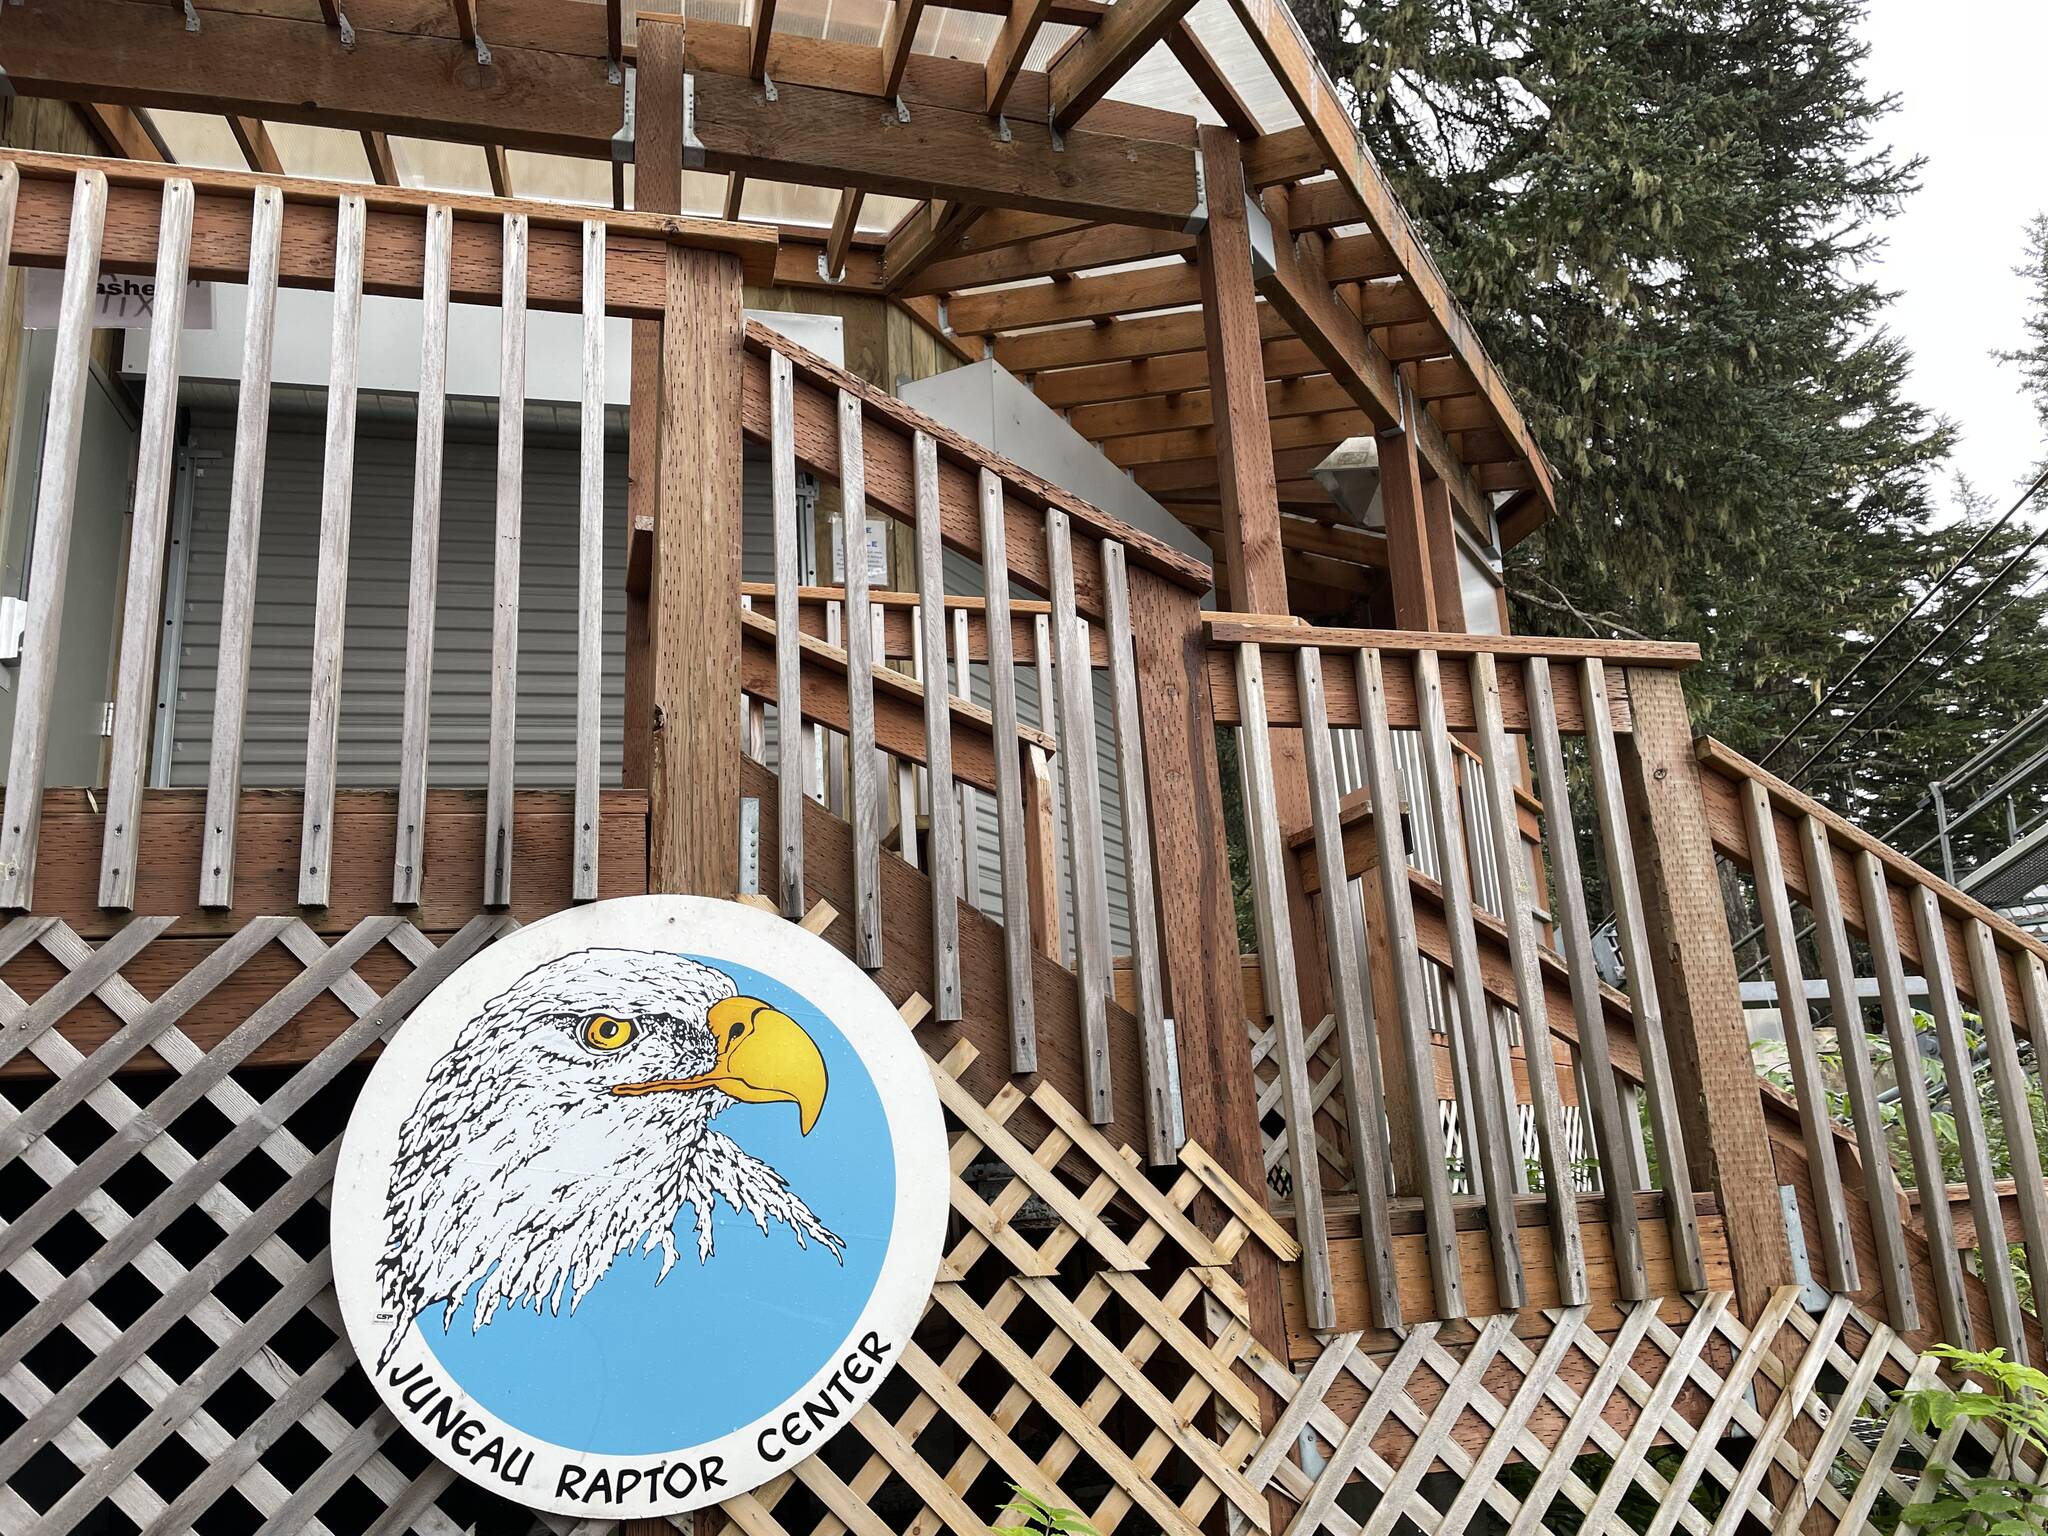 In a letter shared to the public on Monday, Juneau Raptor Center President Dale Cotton announced “it is with great sorrow” that the center has decided to suspend its operations in Juneau after 35 years of service. (Michael S. Lockett / Juneau Empire )